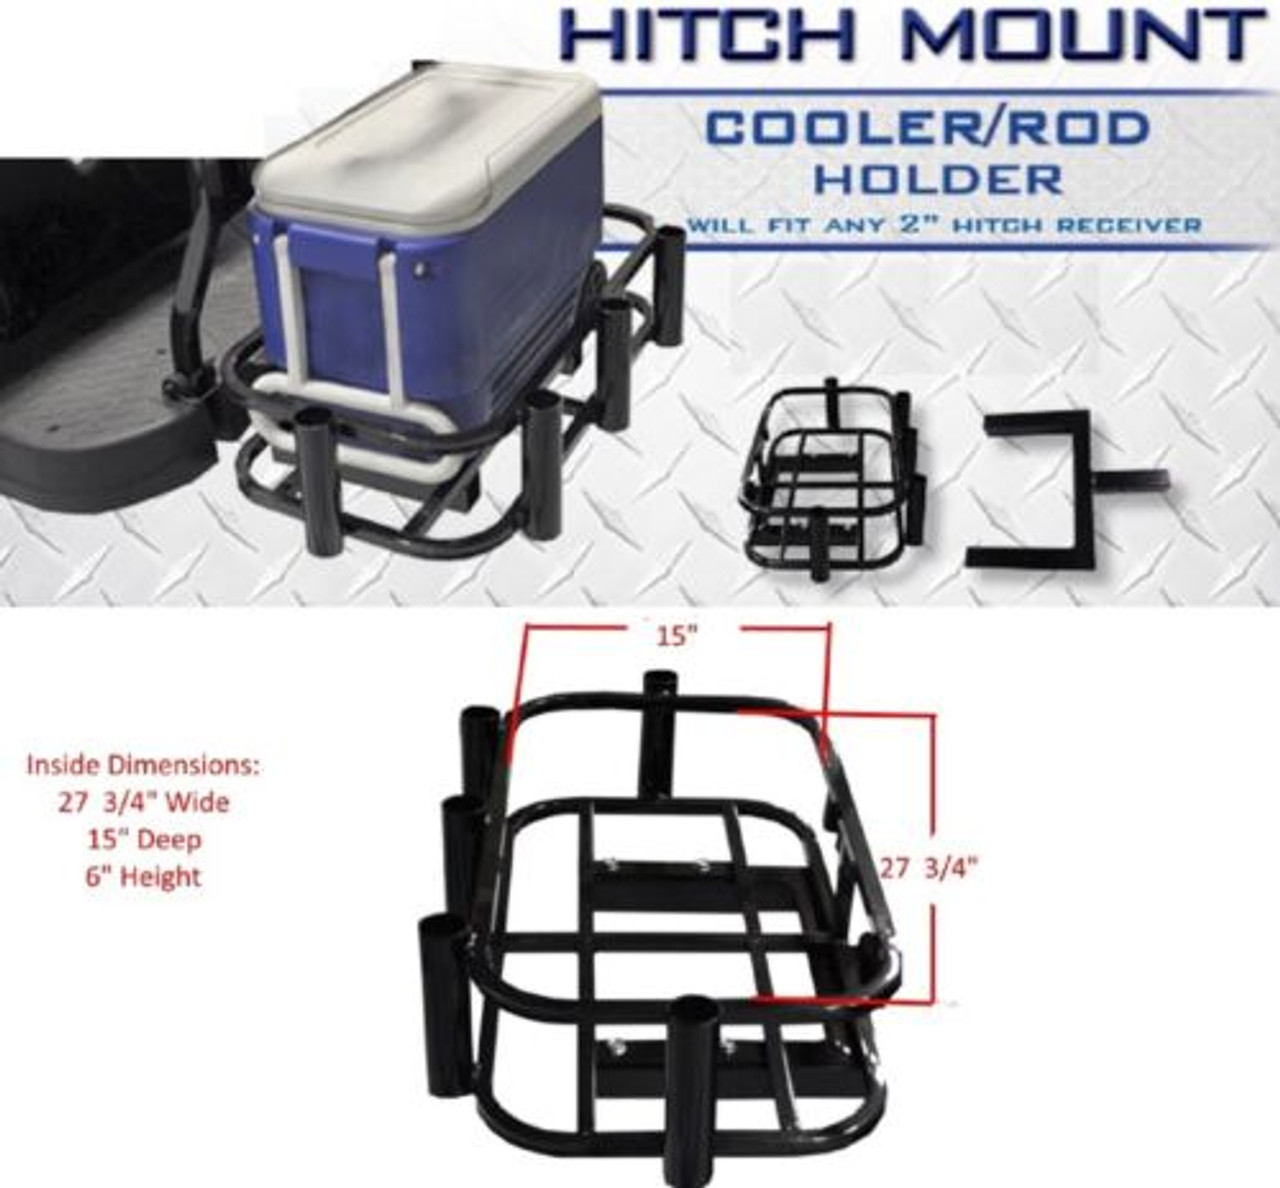 GTW Hitch Mount Cooler/ Rod Holder Rack for Golf Carts with